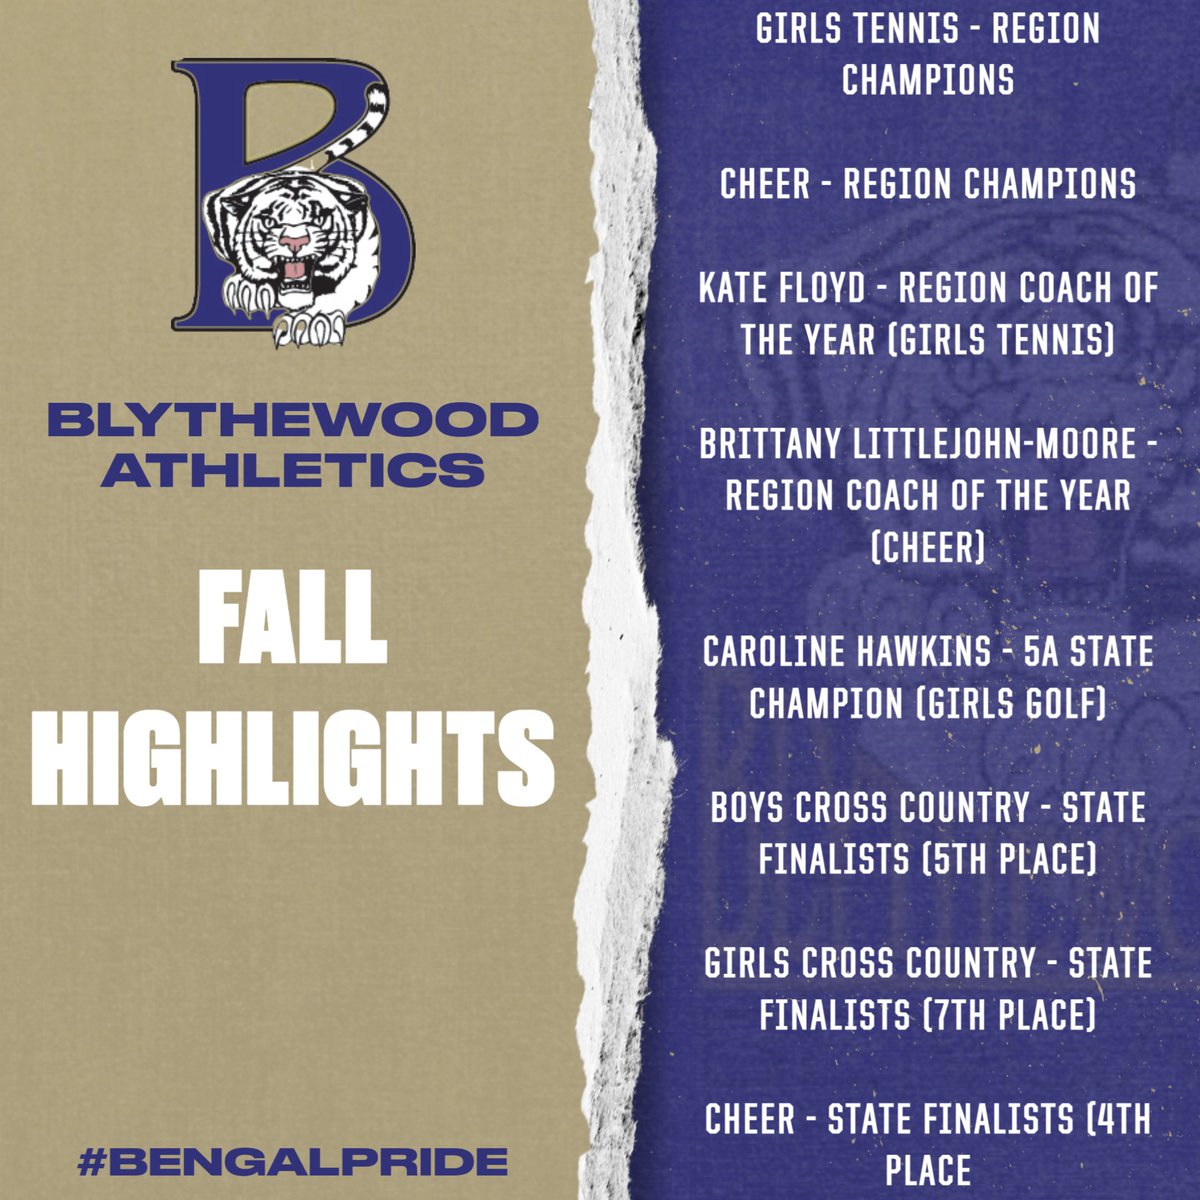 We'd like to take a moment to thank all of our Fall athletes and coaches for their hard work. In addition to the many All-Region and All-State honors our athletes have earned, we had some wonderful team achievements! Thank you for representing Blythewood High School so well!